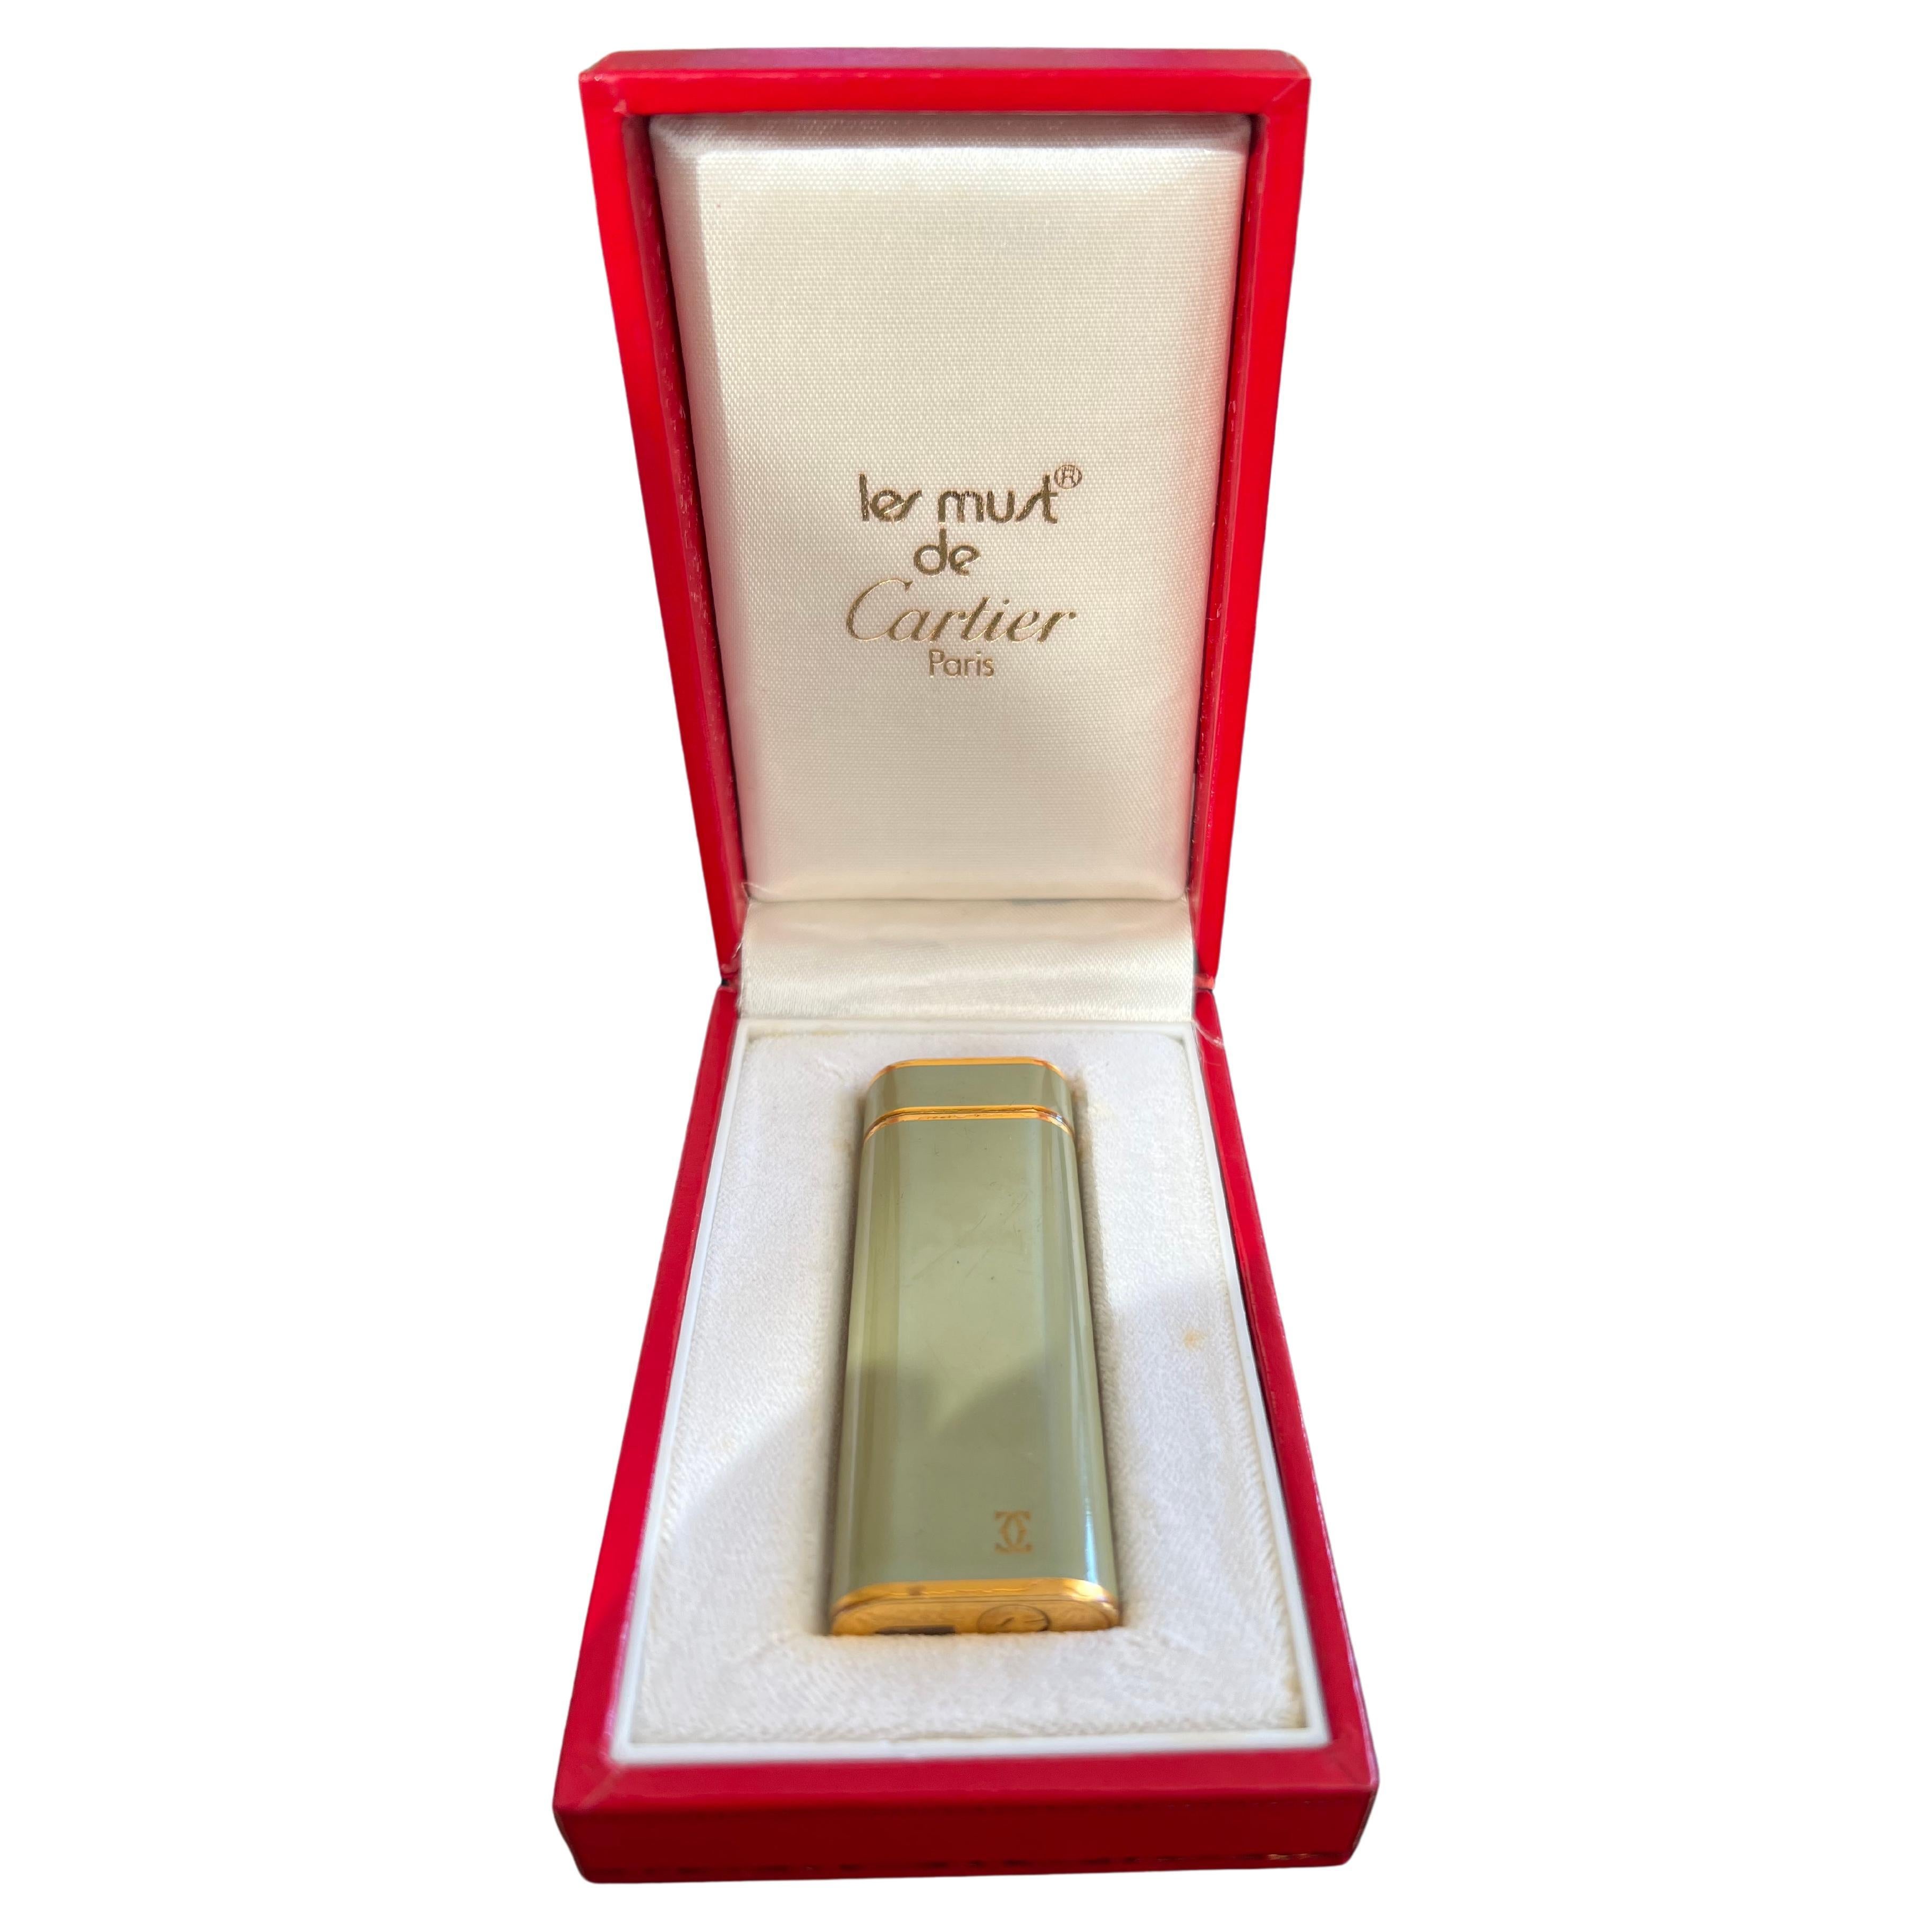 A Les Must De Cartier Paris 18k gold plated and Olive Chinese lacquer lighter